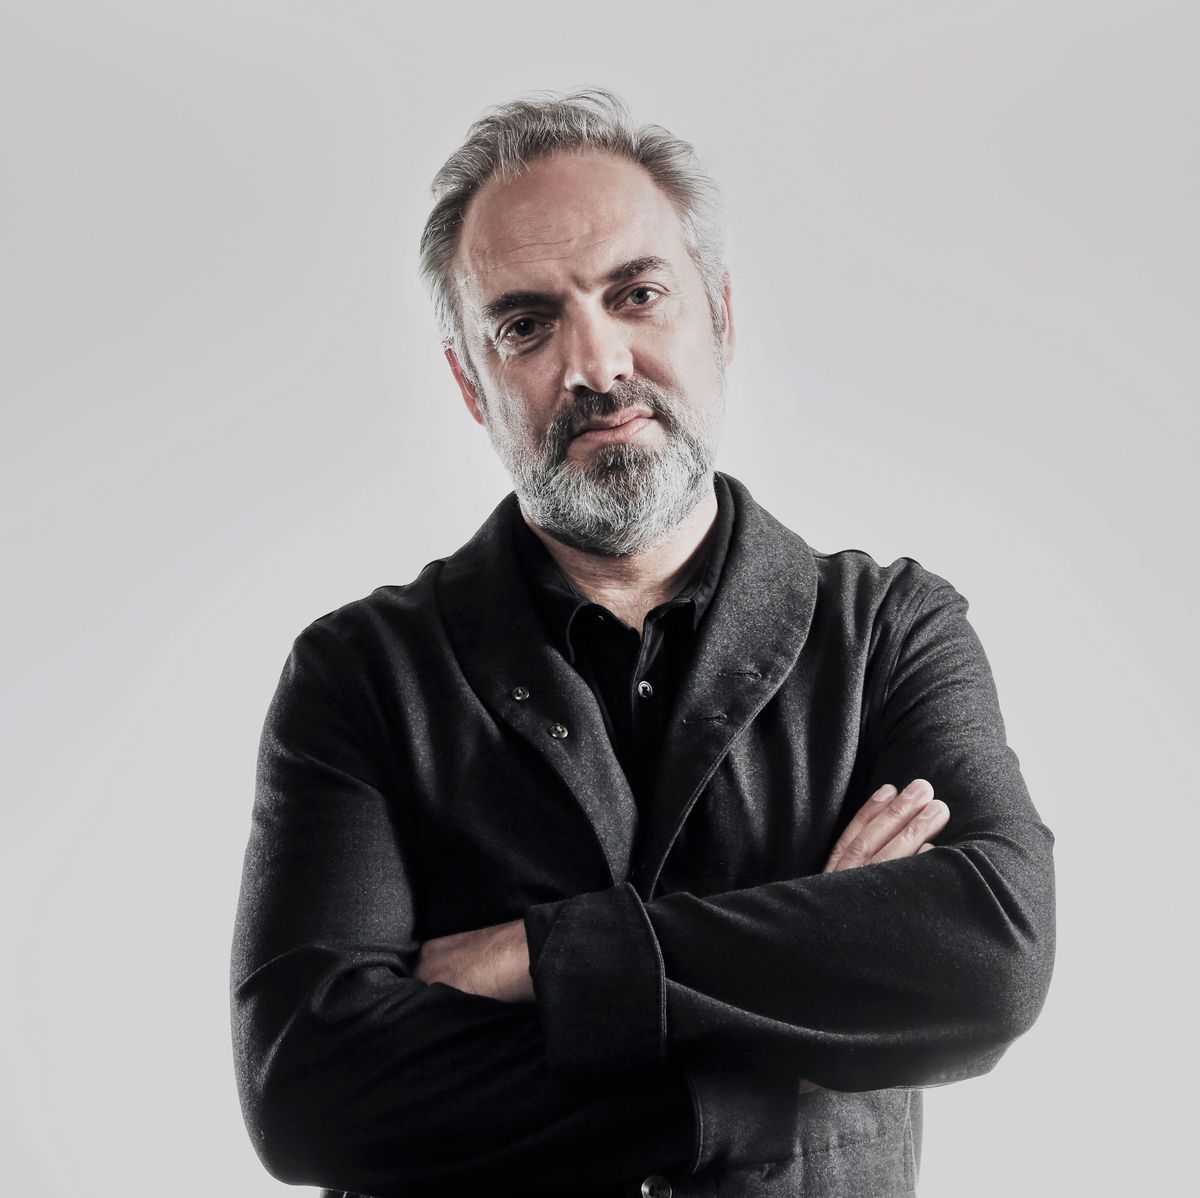 1917 Director Sam Mendes on Filming WWI - Interview